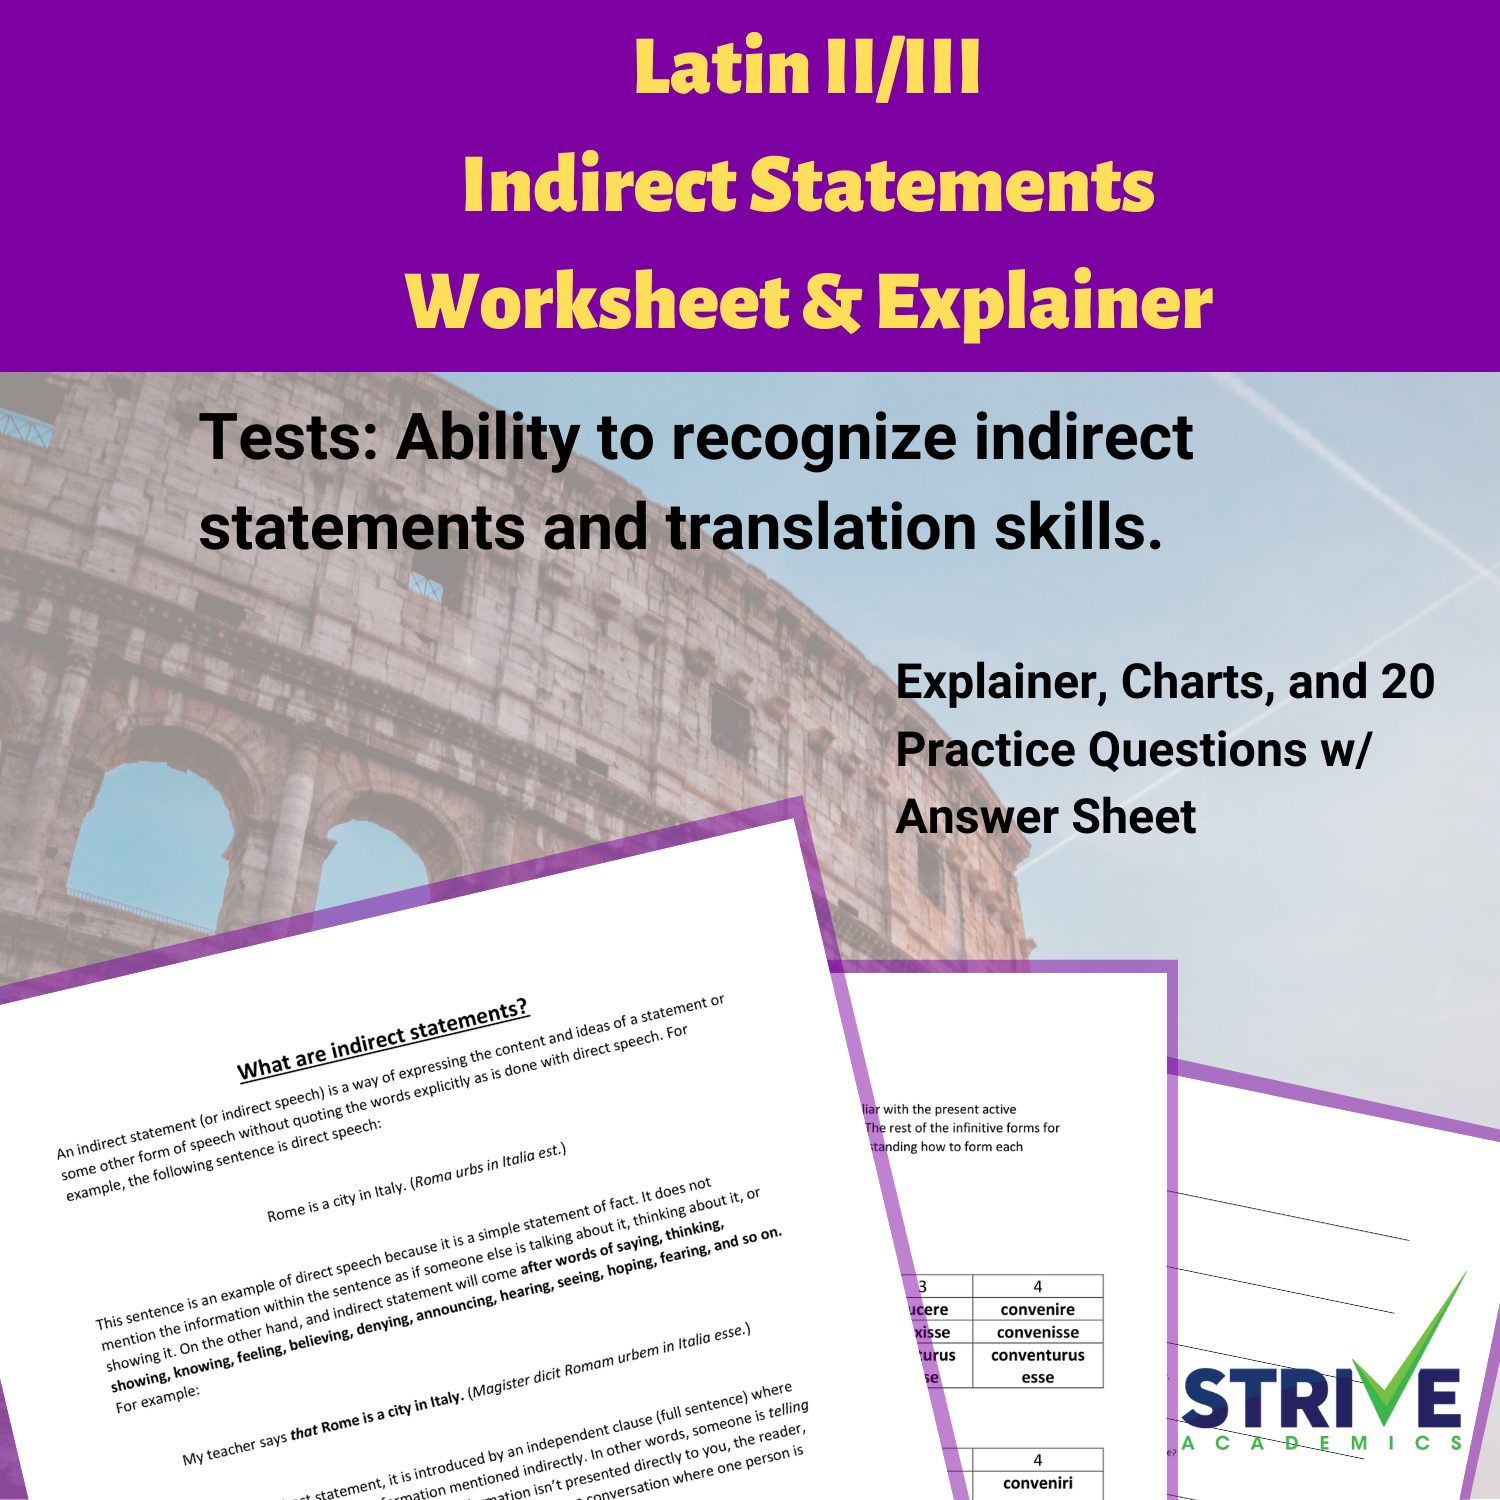 Latin II/III: Indirect Statements Worksheet and Explainer's featured image